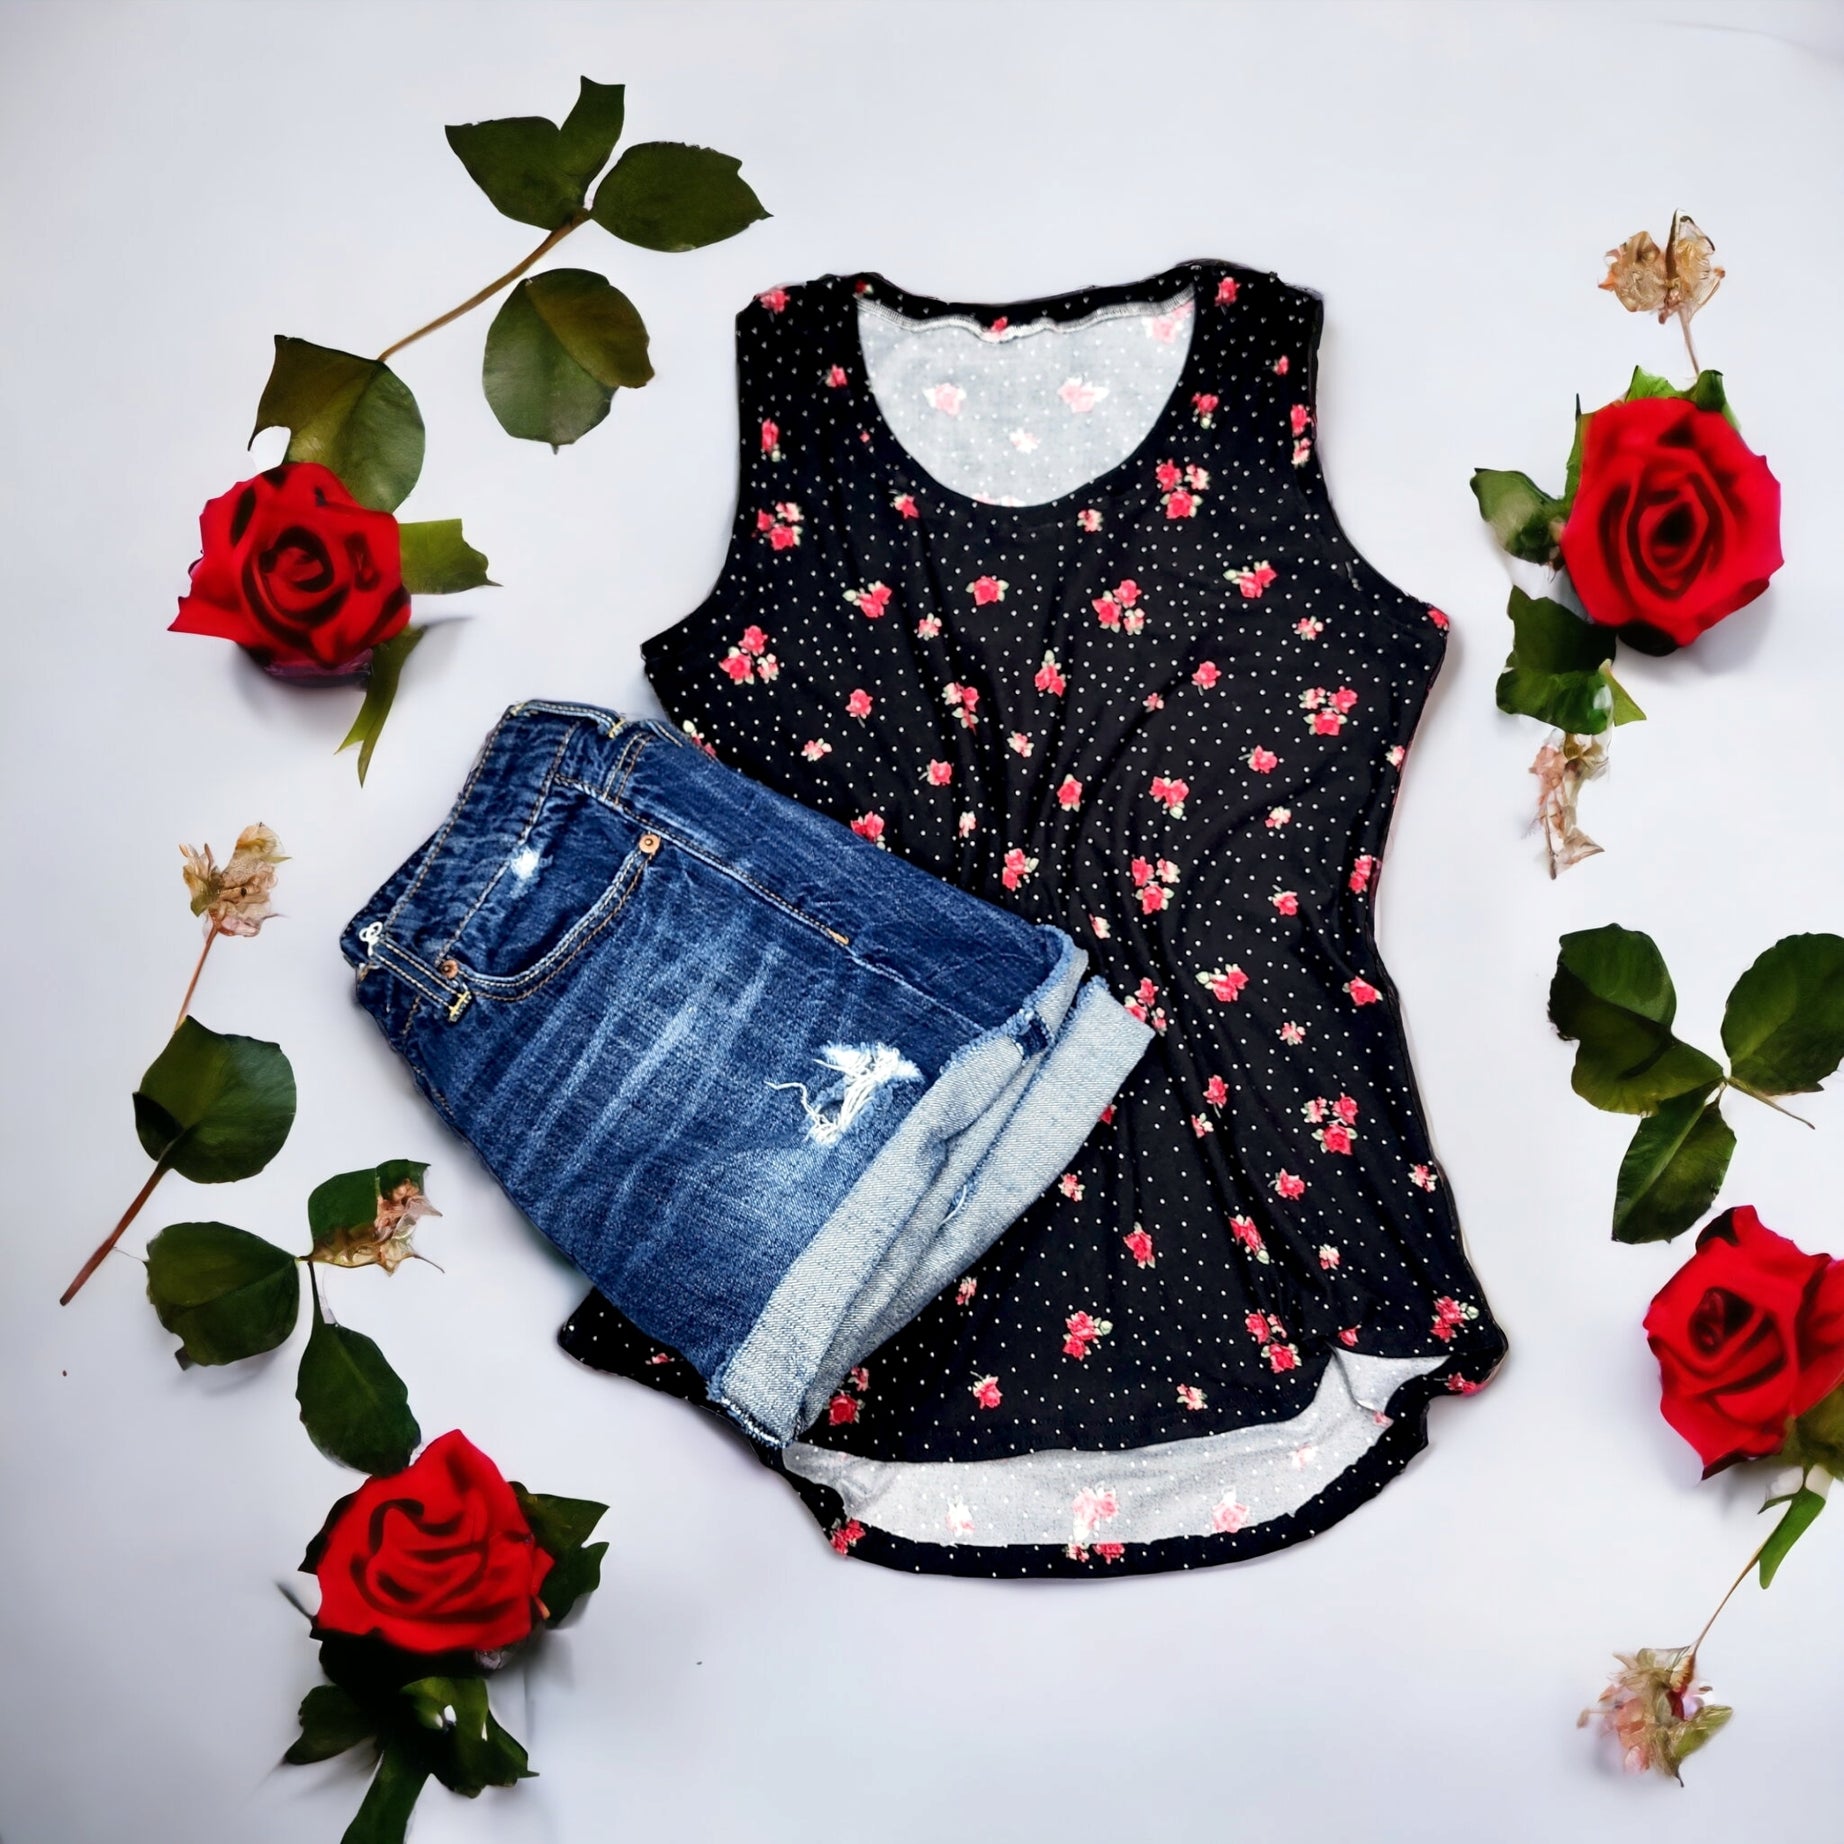 Vintage Pinup Style Summer Tank Top for Women, Roses and Polka Dots